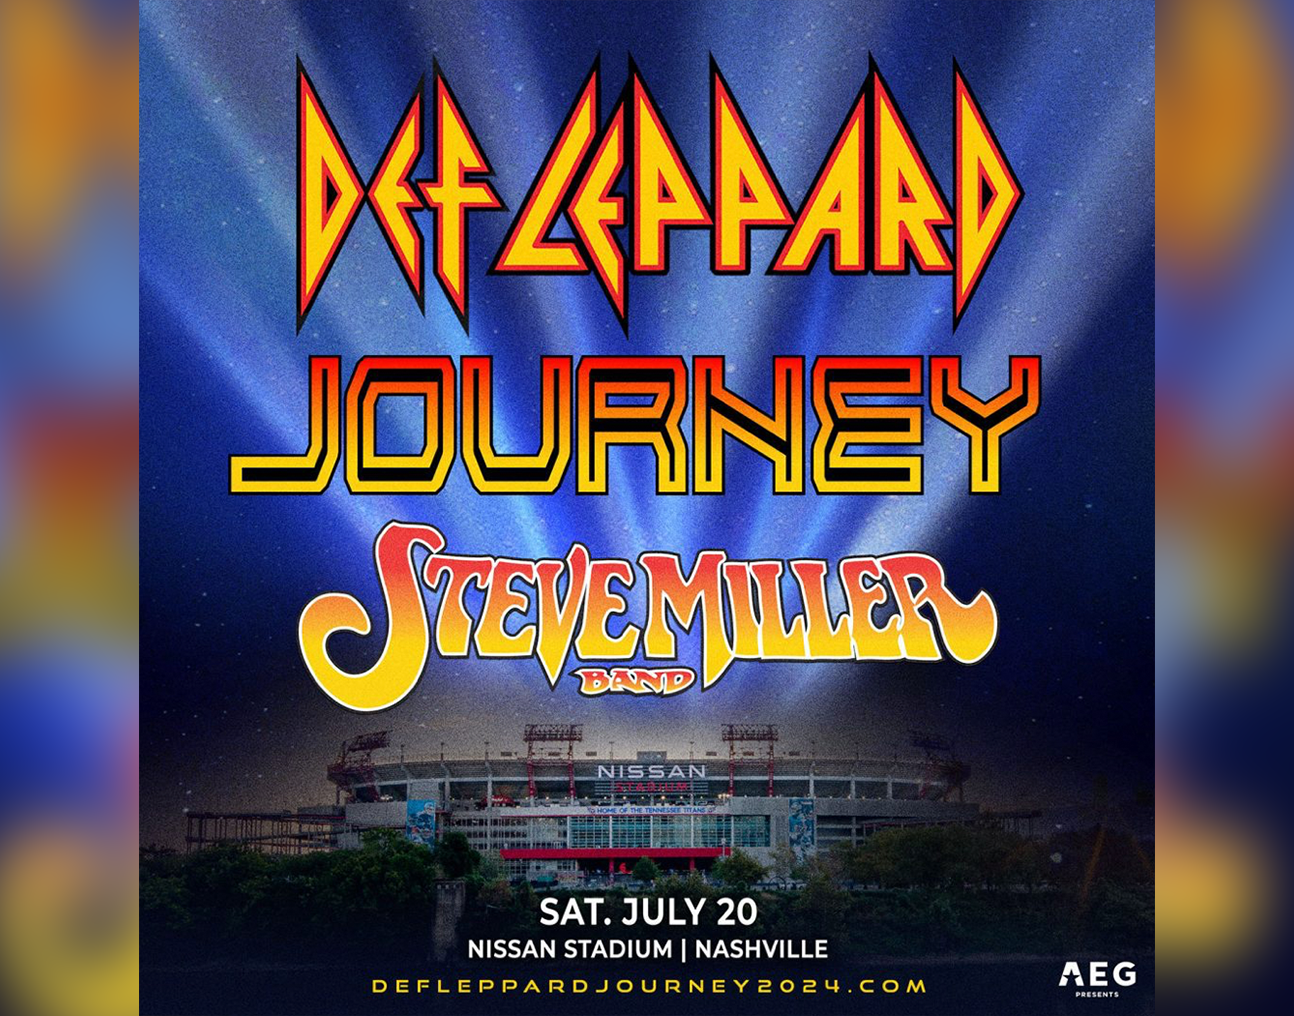 Free Ticket Fridays with Coke & Def Leppard/Journey